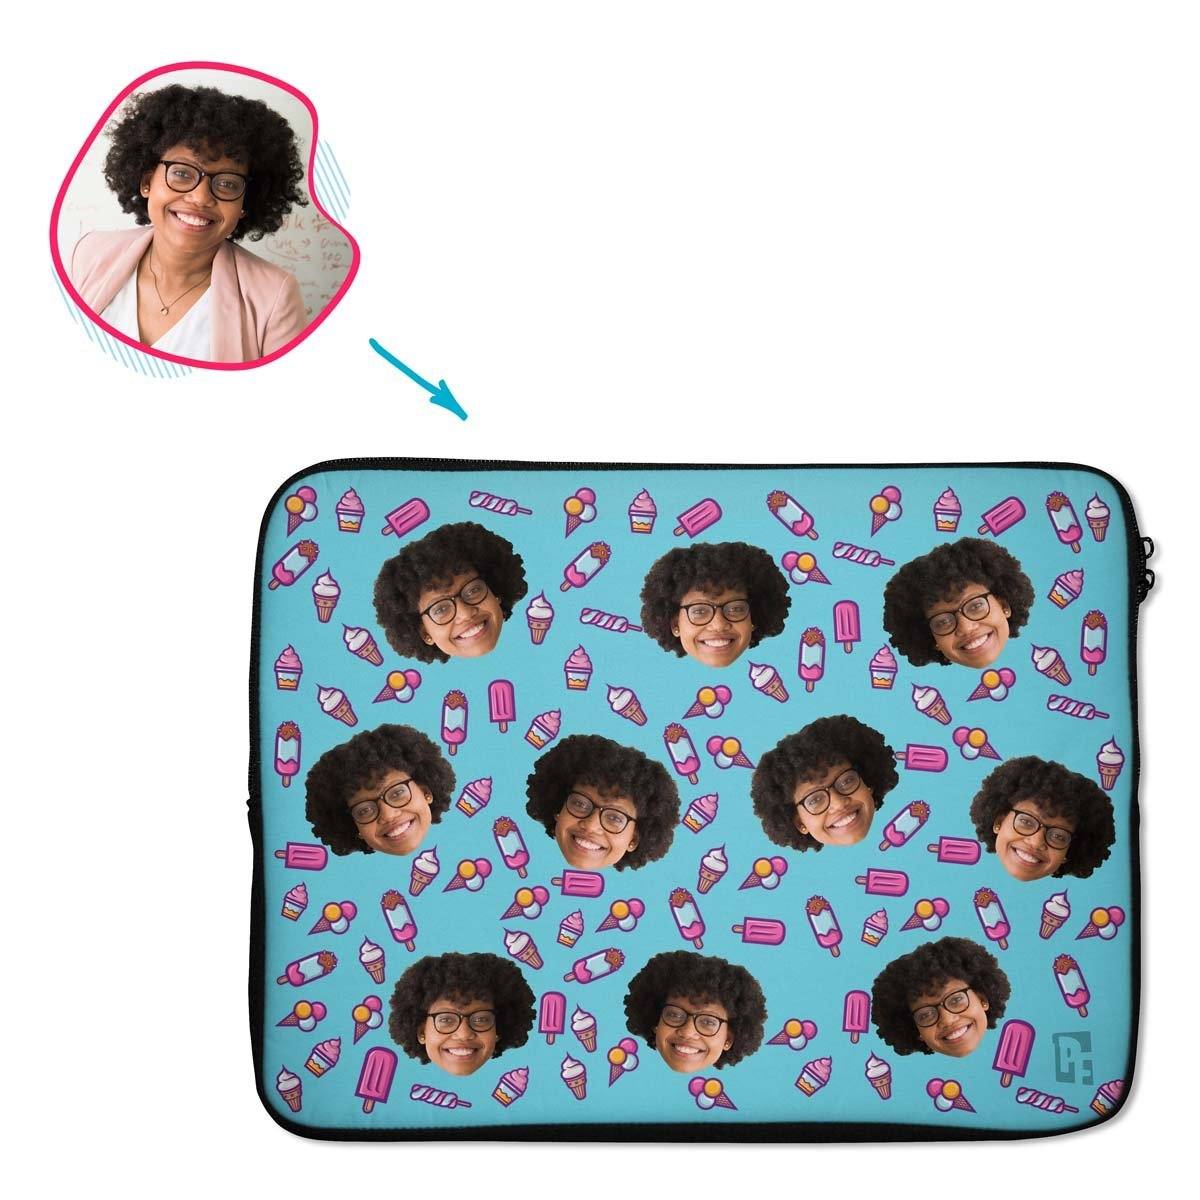 blue Candies laptop sleeve personalized with photo of face printed on them